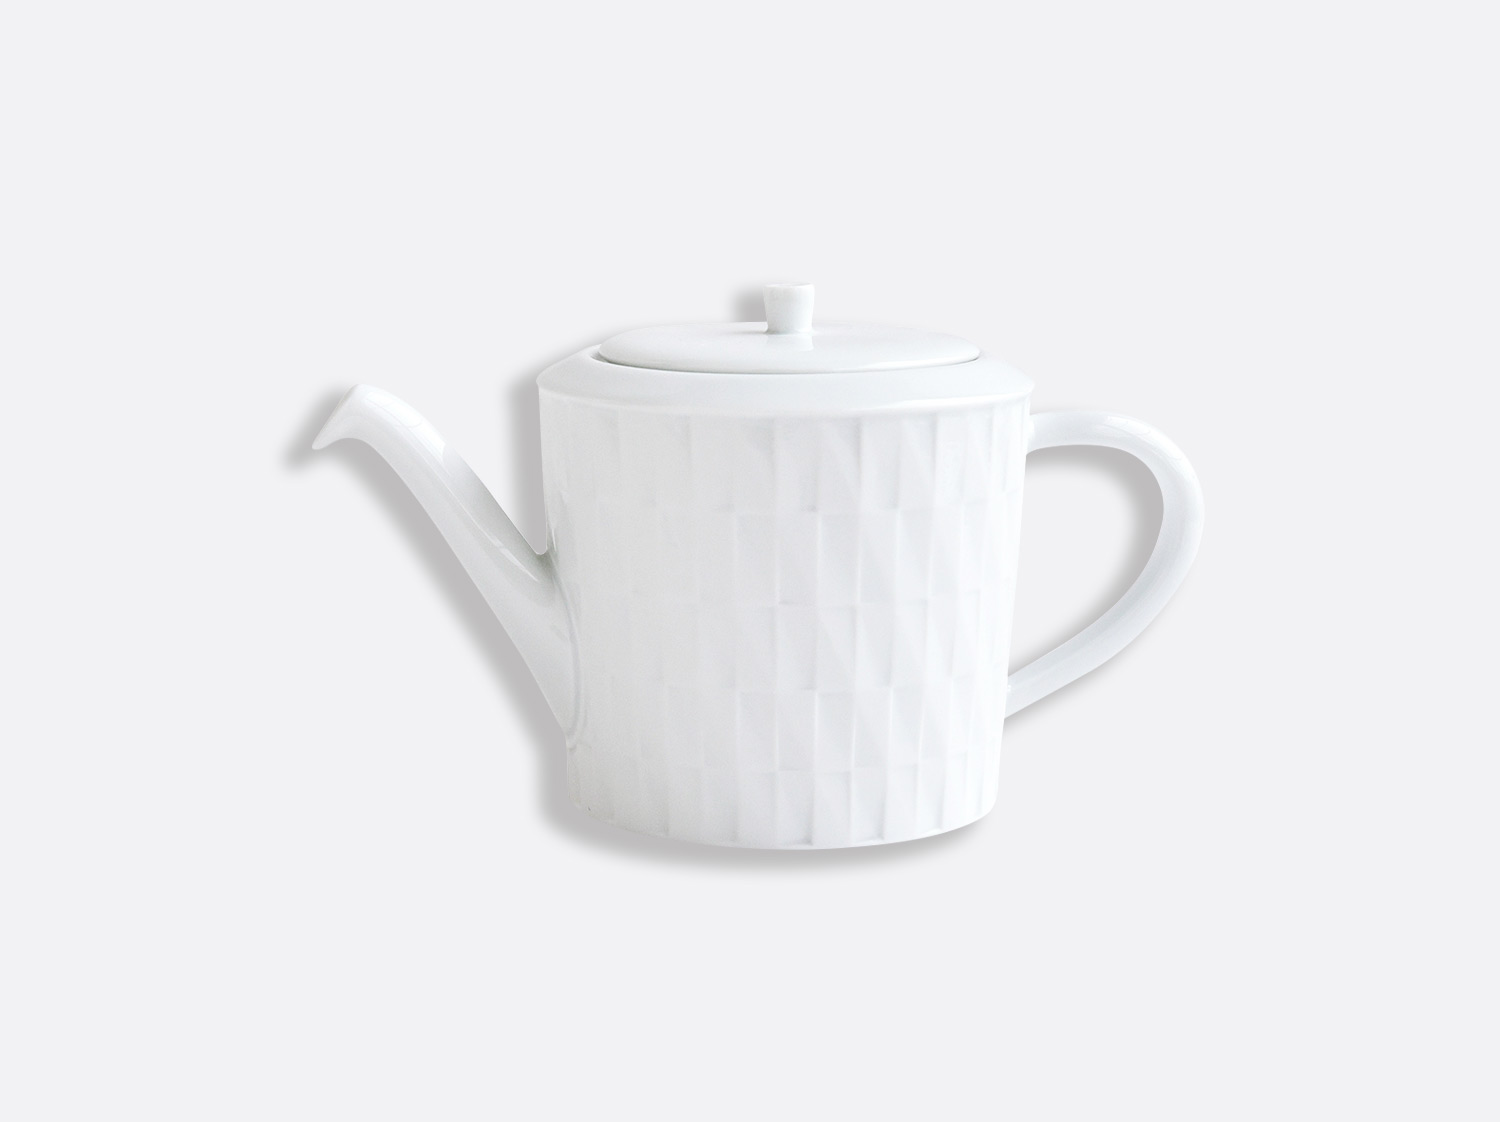 China Hot beverage server 6 cups 17 oz of the collection Twist | Bernardaud